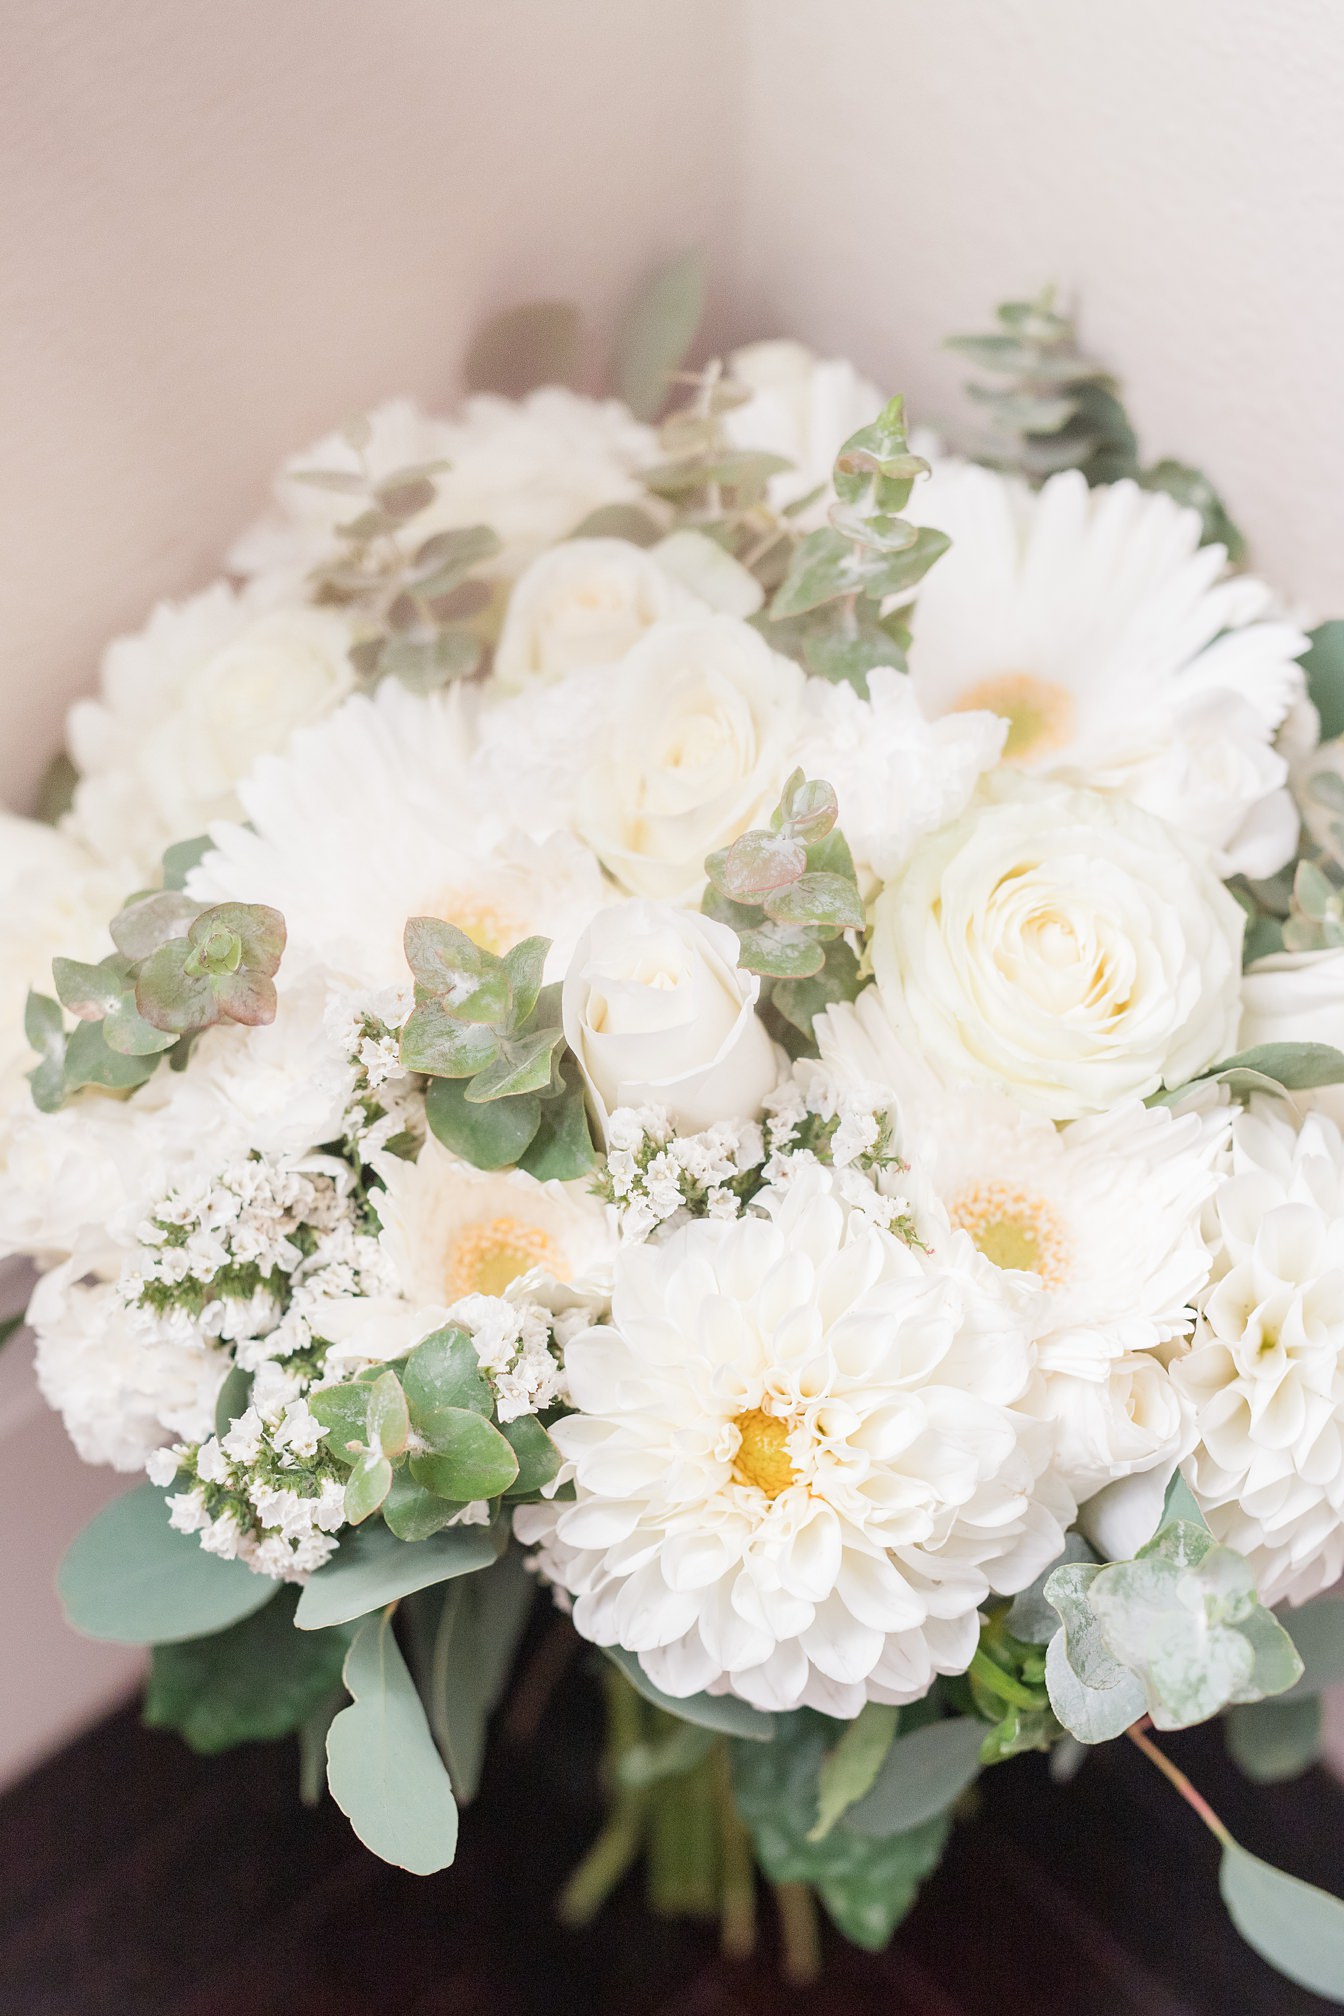 Bridal Bouquet with White Dahlia's, White Roses, and White Daisys by Adrienne and Dani Photography